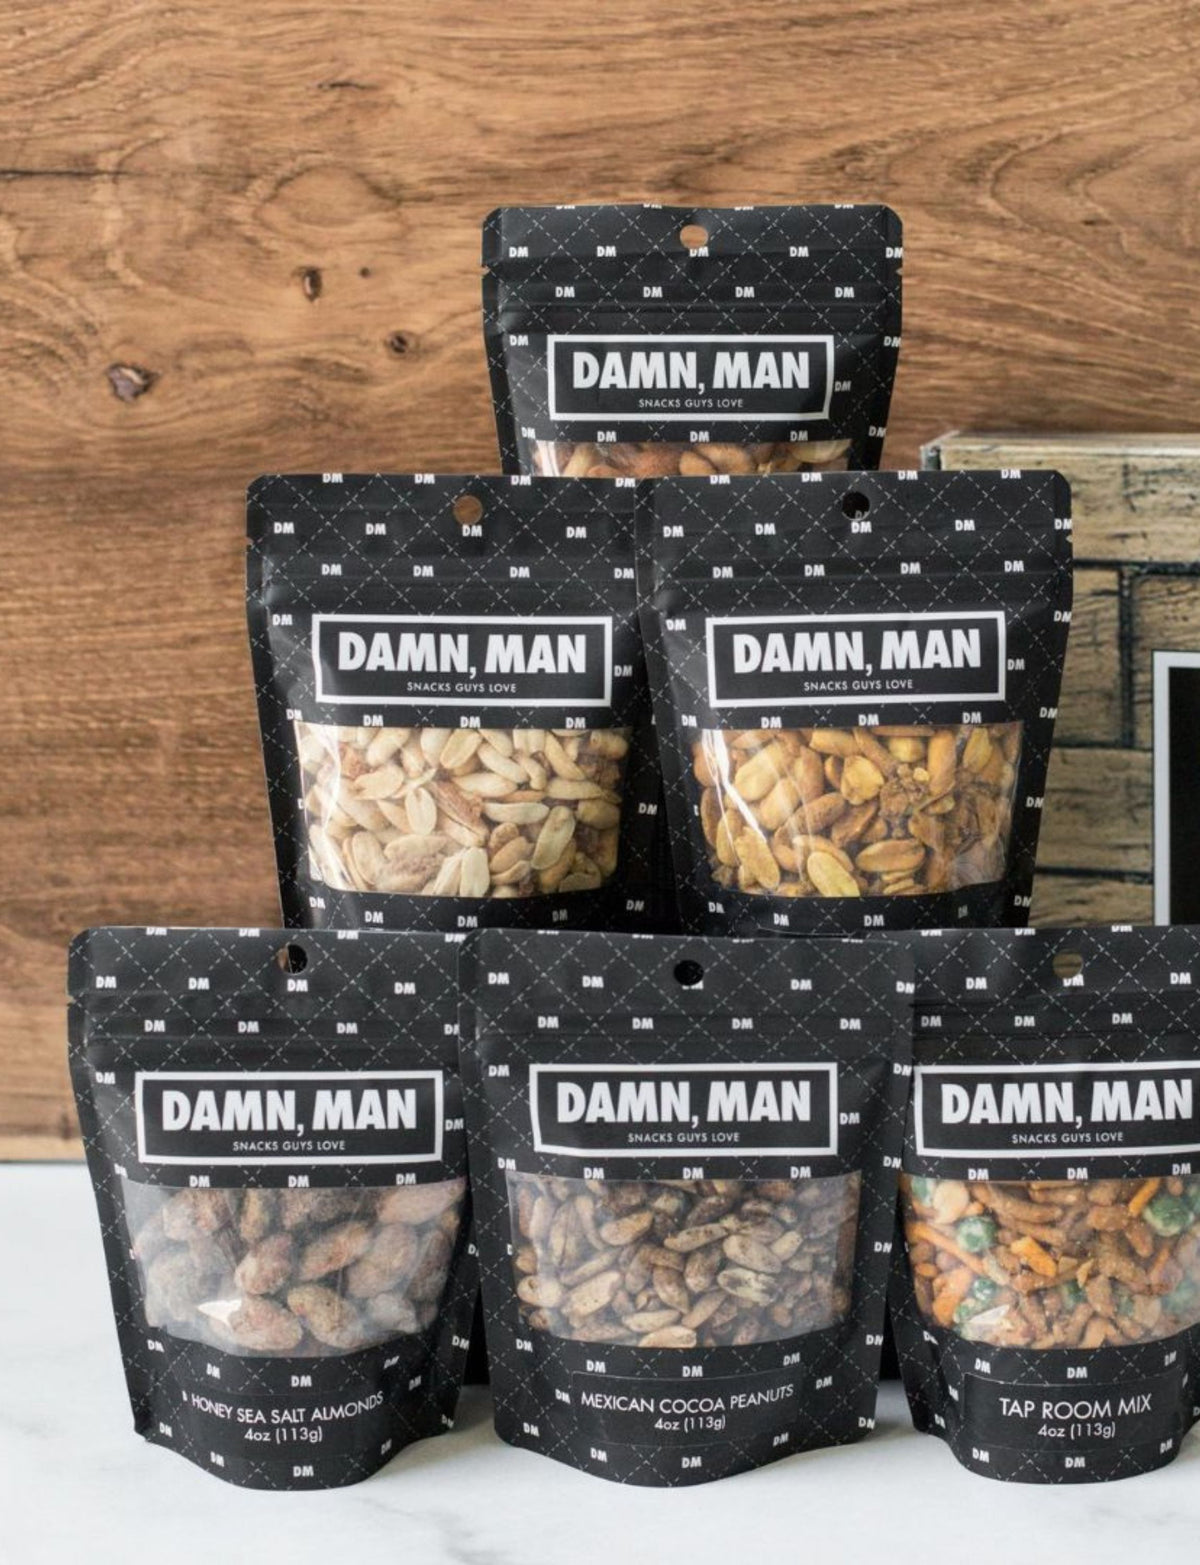 Damn Man Assorted Nuts and Snacks photo